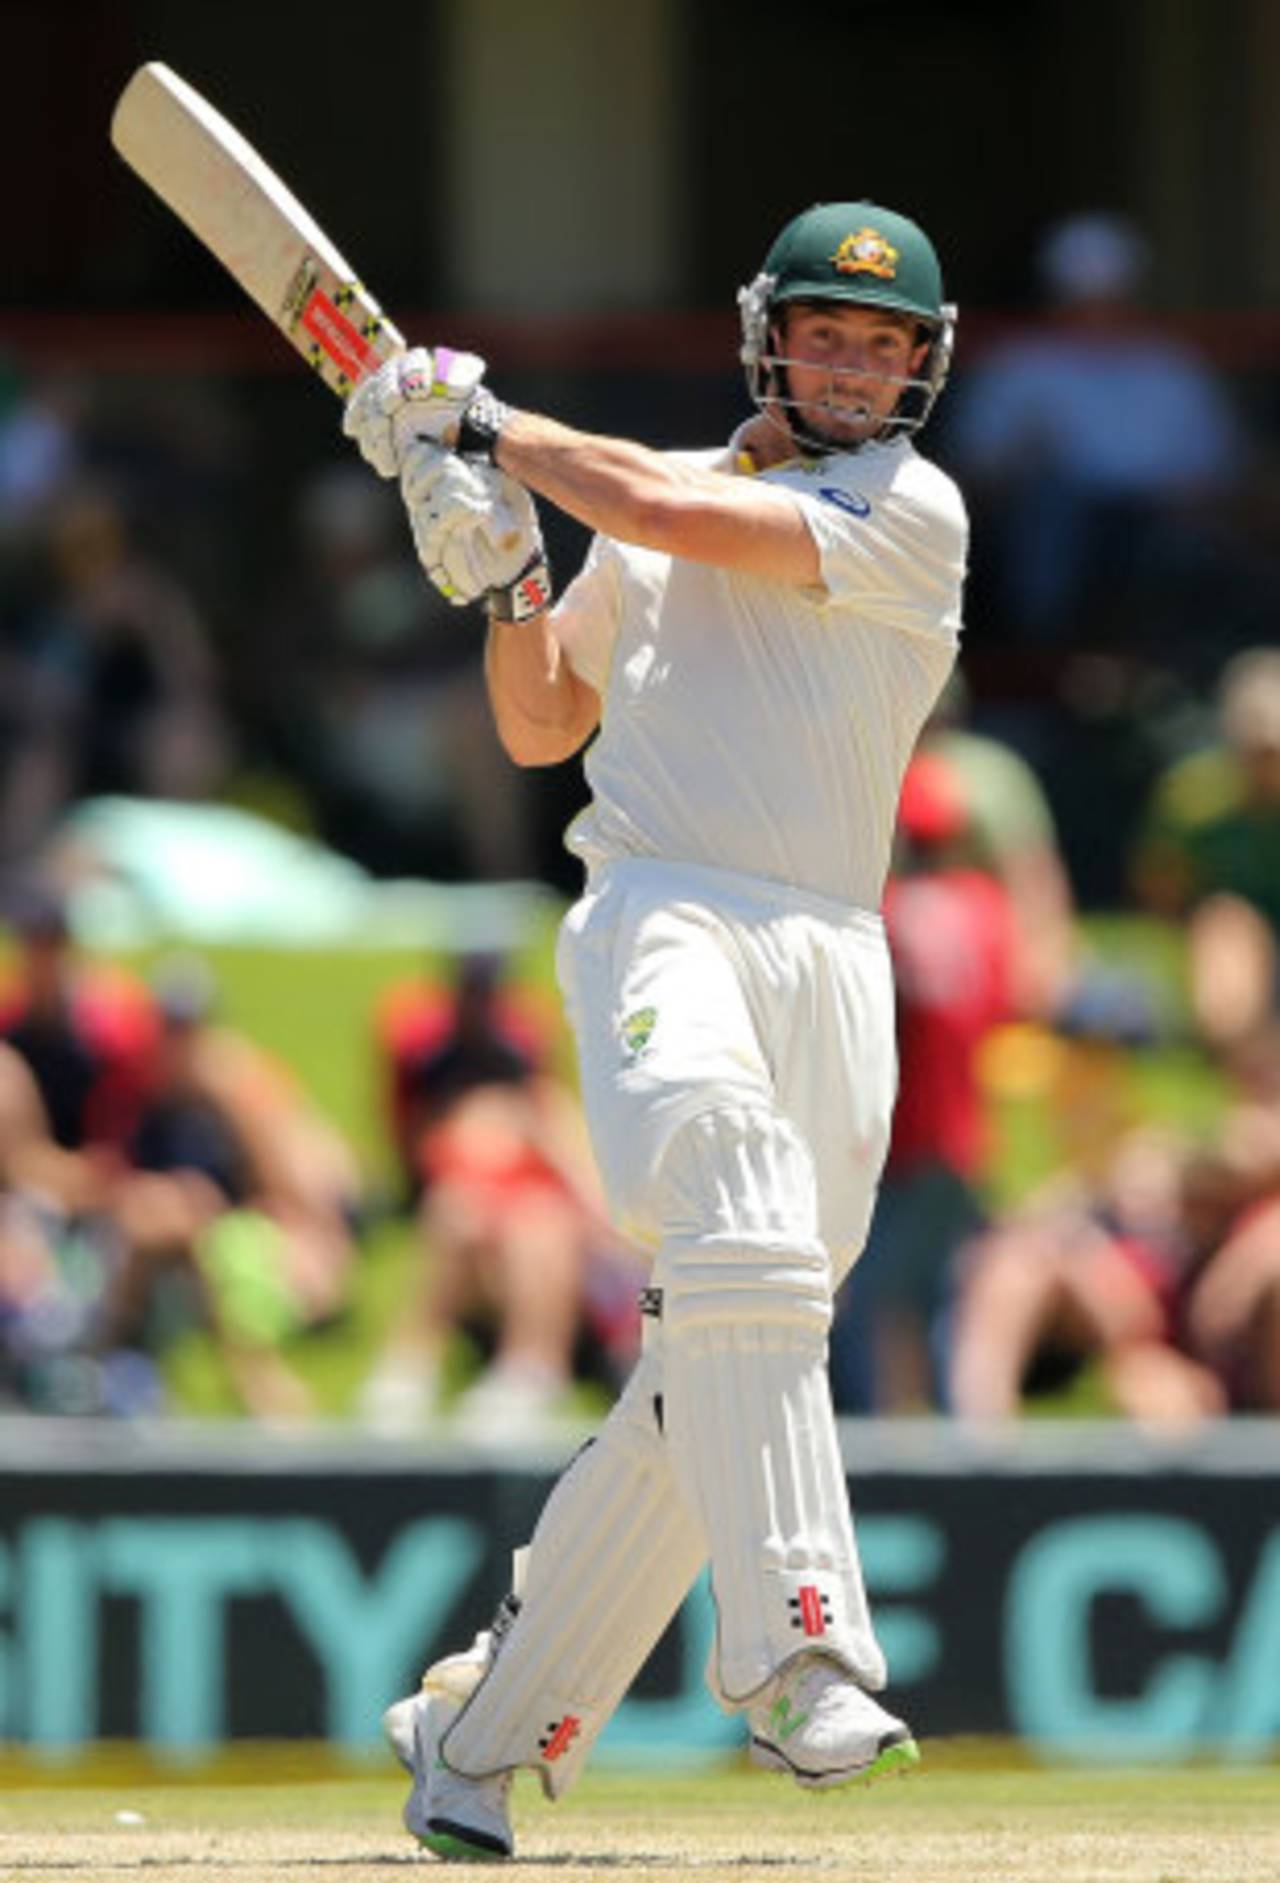 Shaun Marsh made his second Test century and the first by an Australian No. 4 against South Africa in eight years&nbsp;&nbsp;&bull;&nbsp;&nbsp;Getty Images